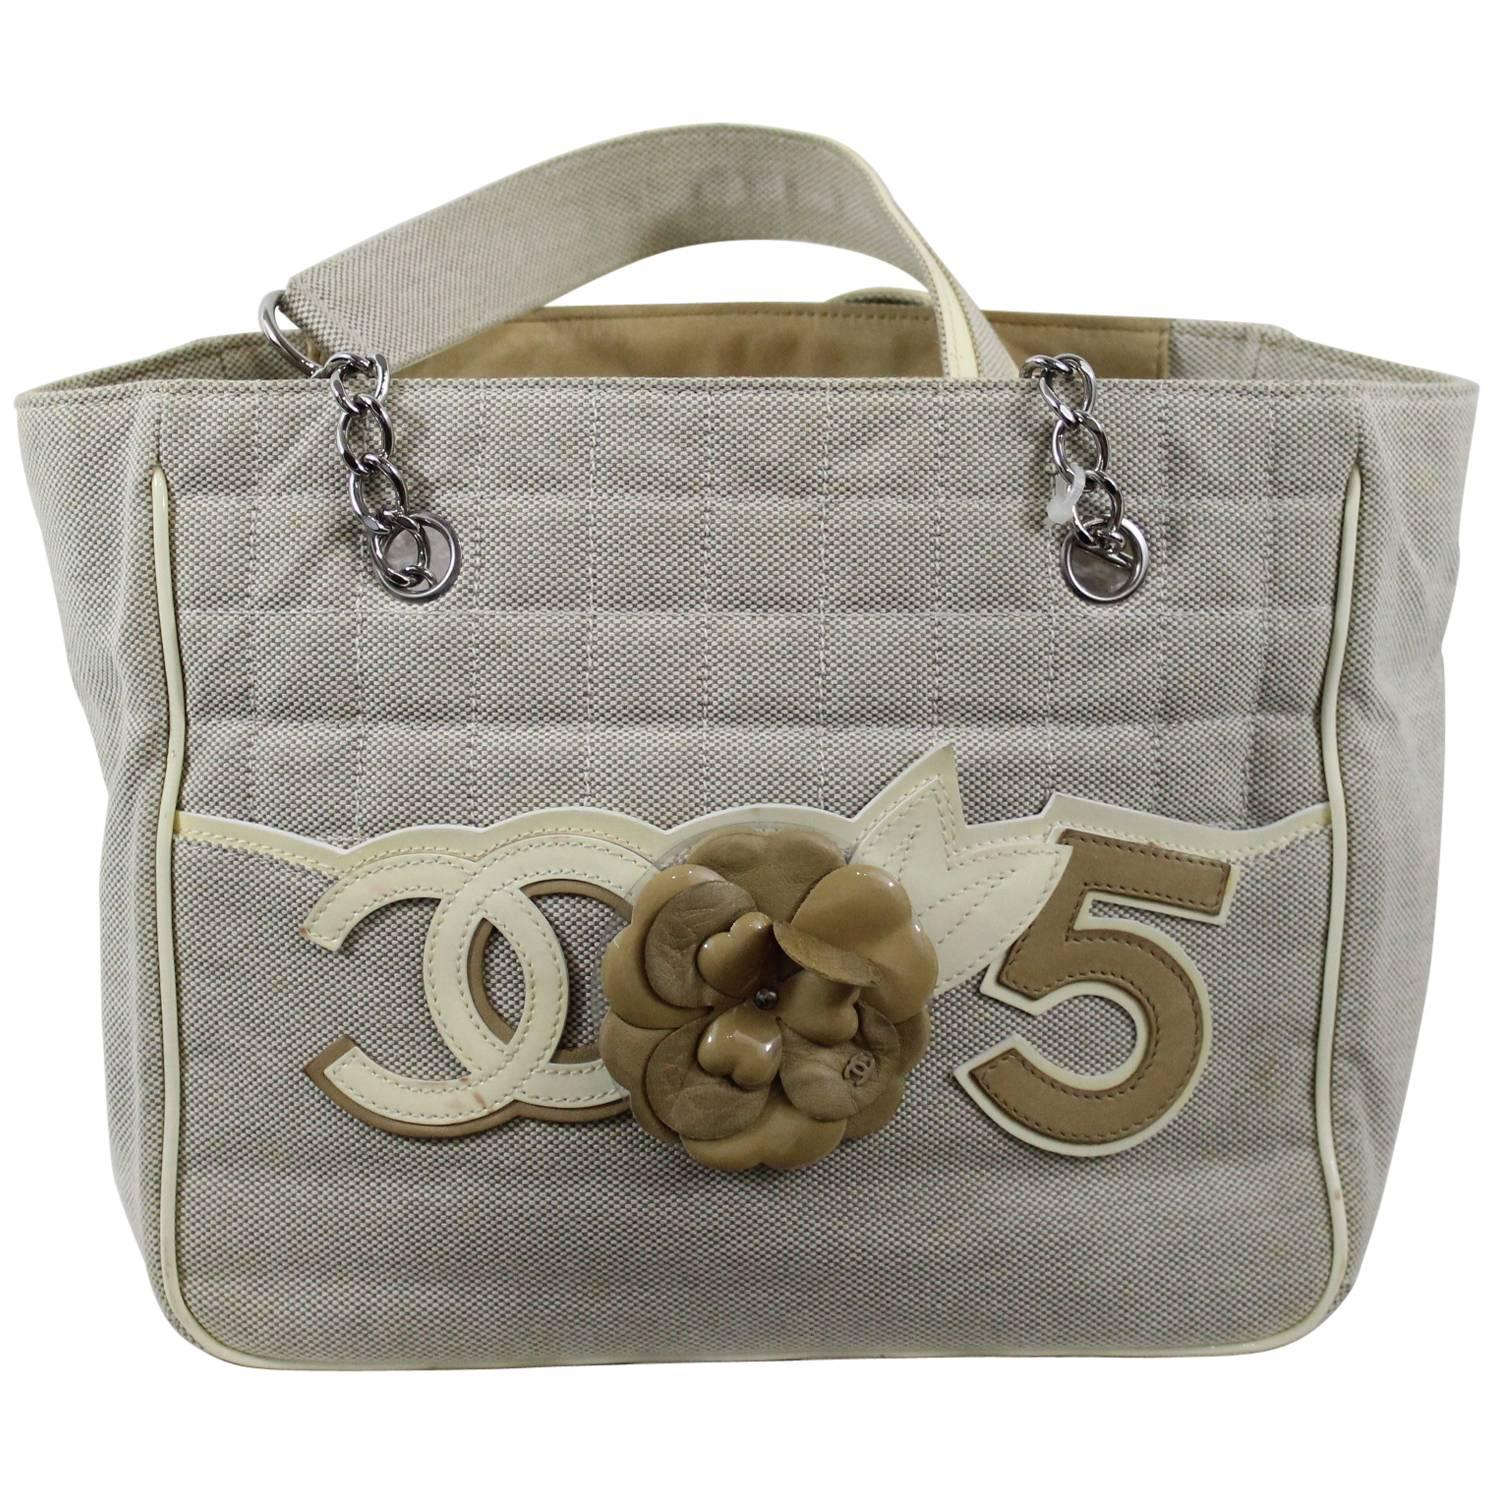 2005-2006 Chanel Camelia N°5 Tote Bag in Canvas and Patented Leather